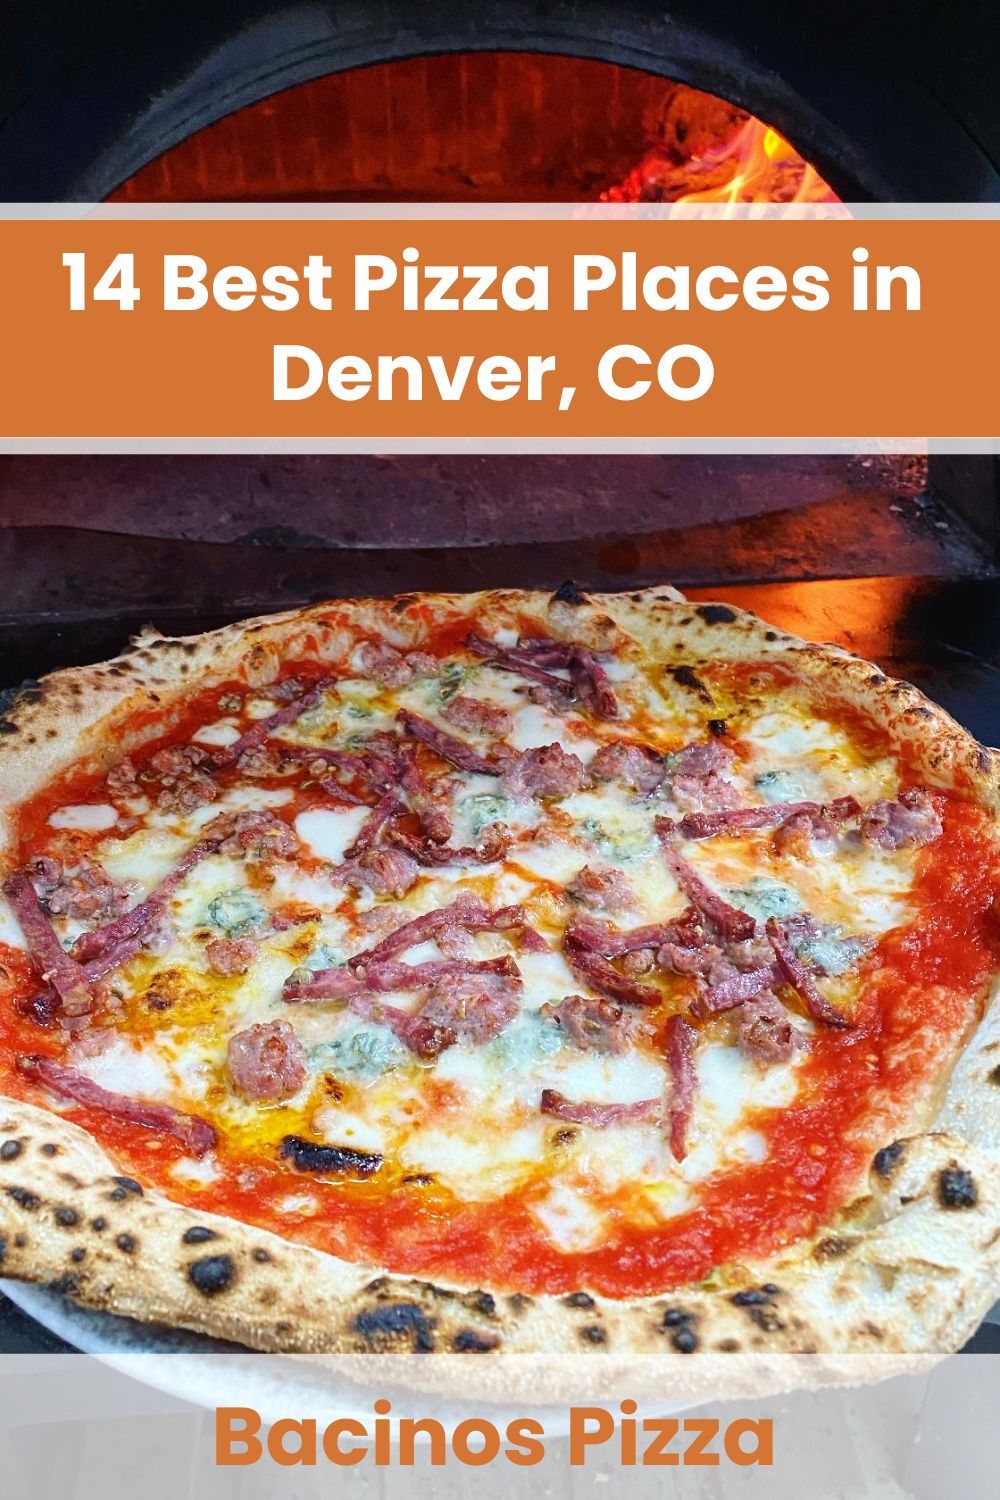 Pizza Places in Denver